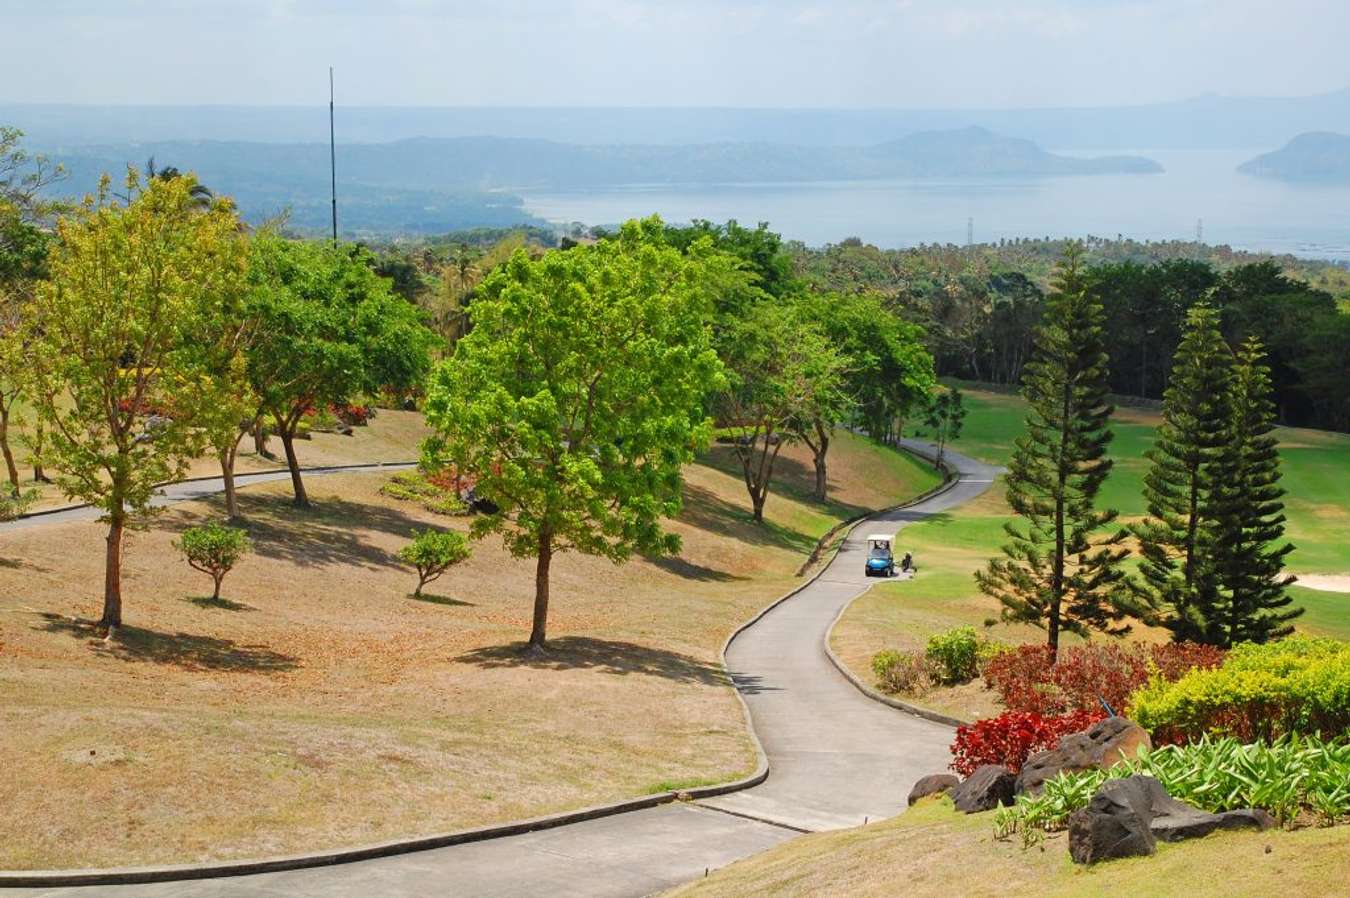 map of tourist spot in tagaytay